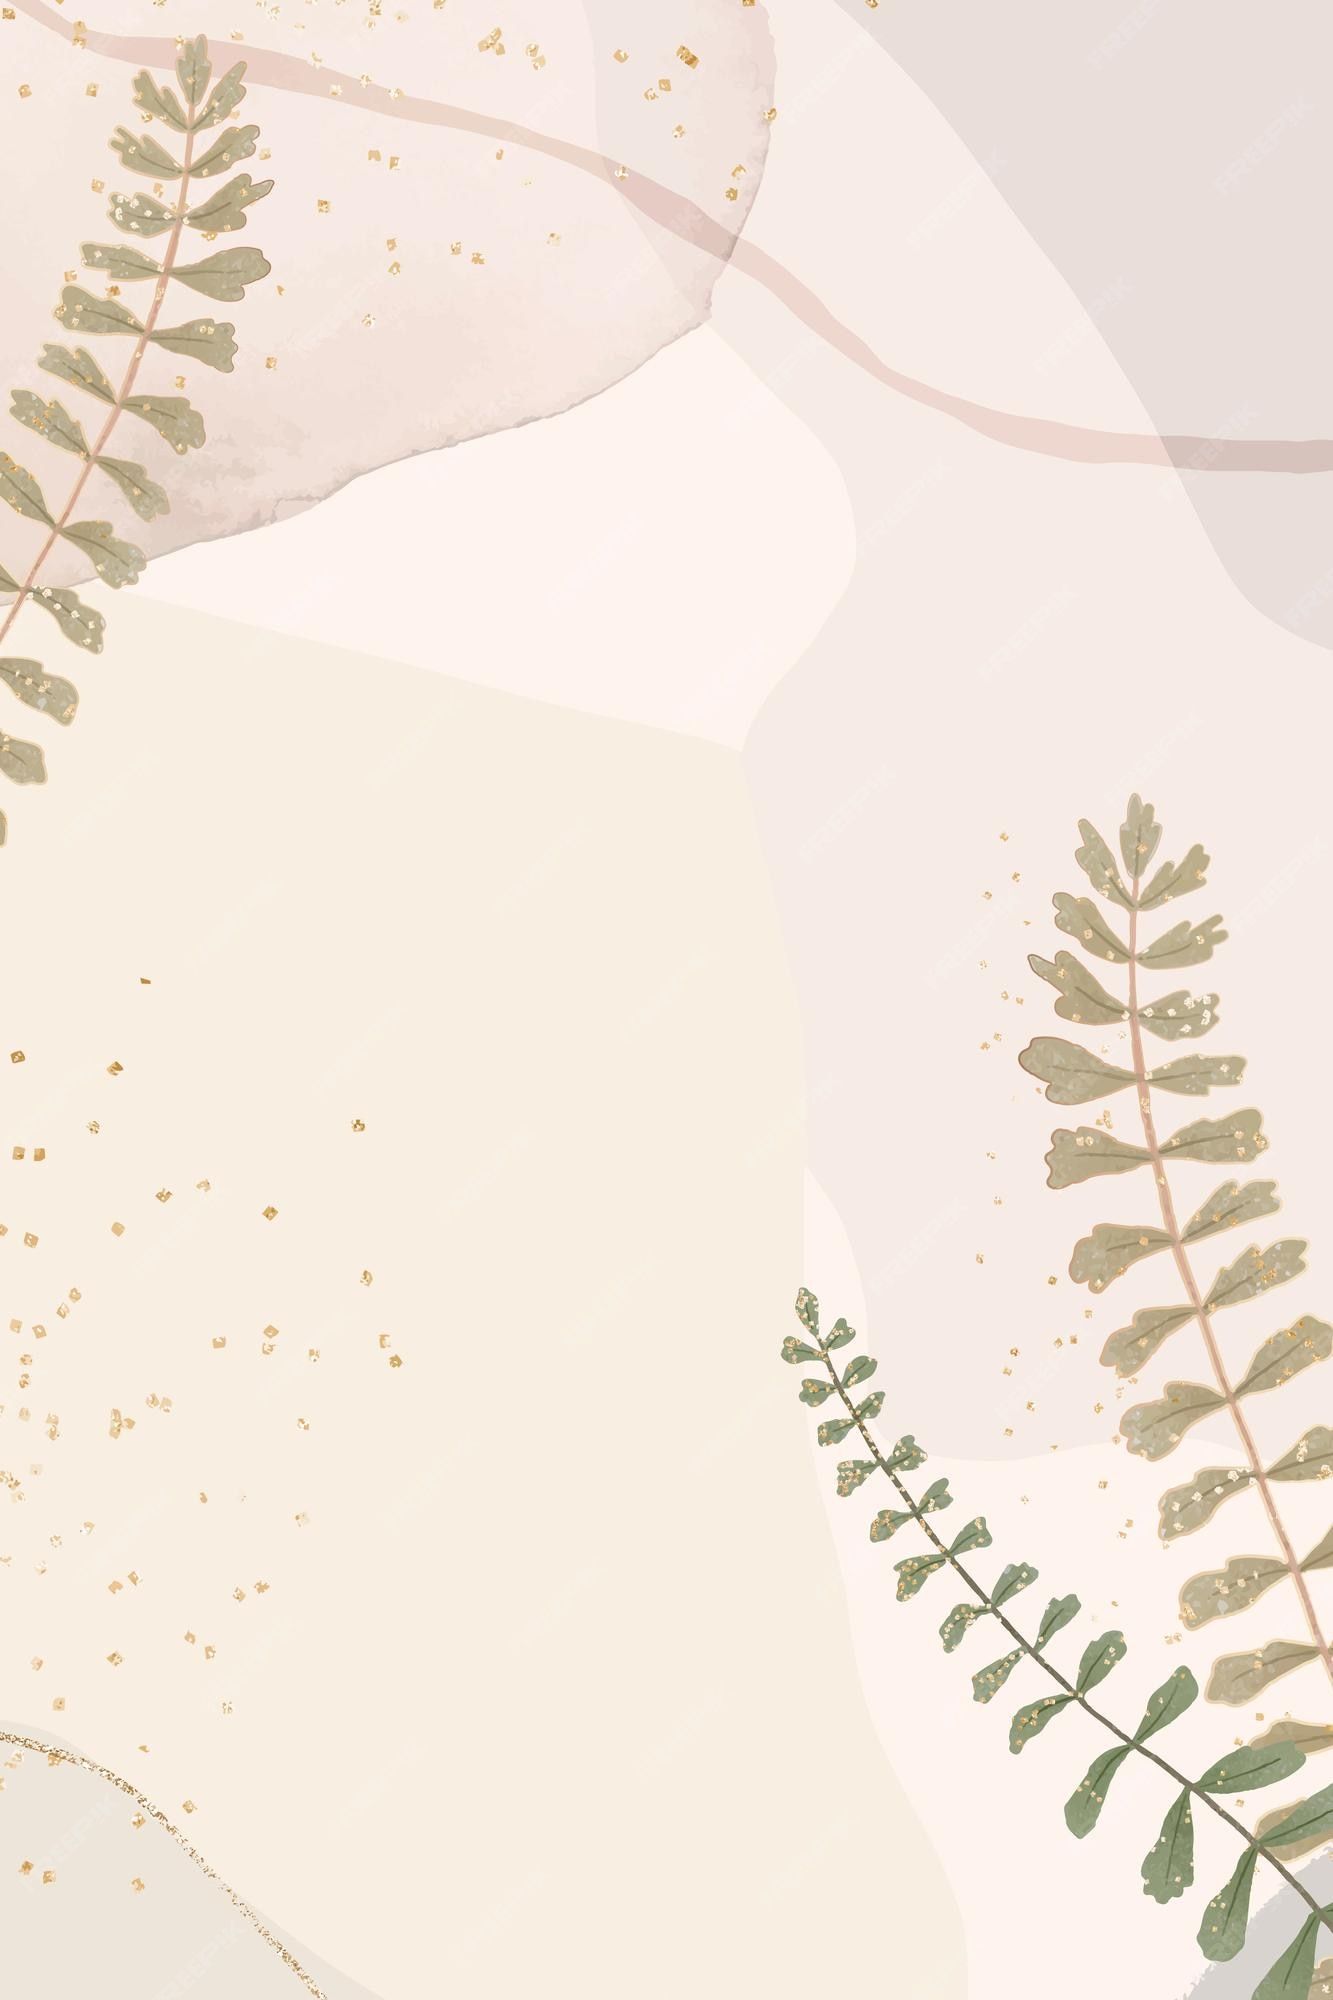 A wallpaper with abstract shapes and green leaves - Neutral